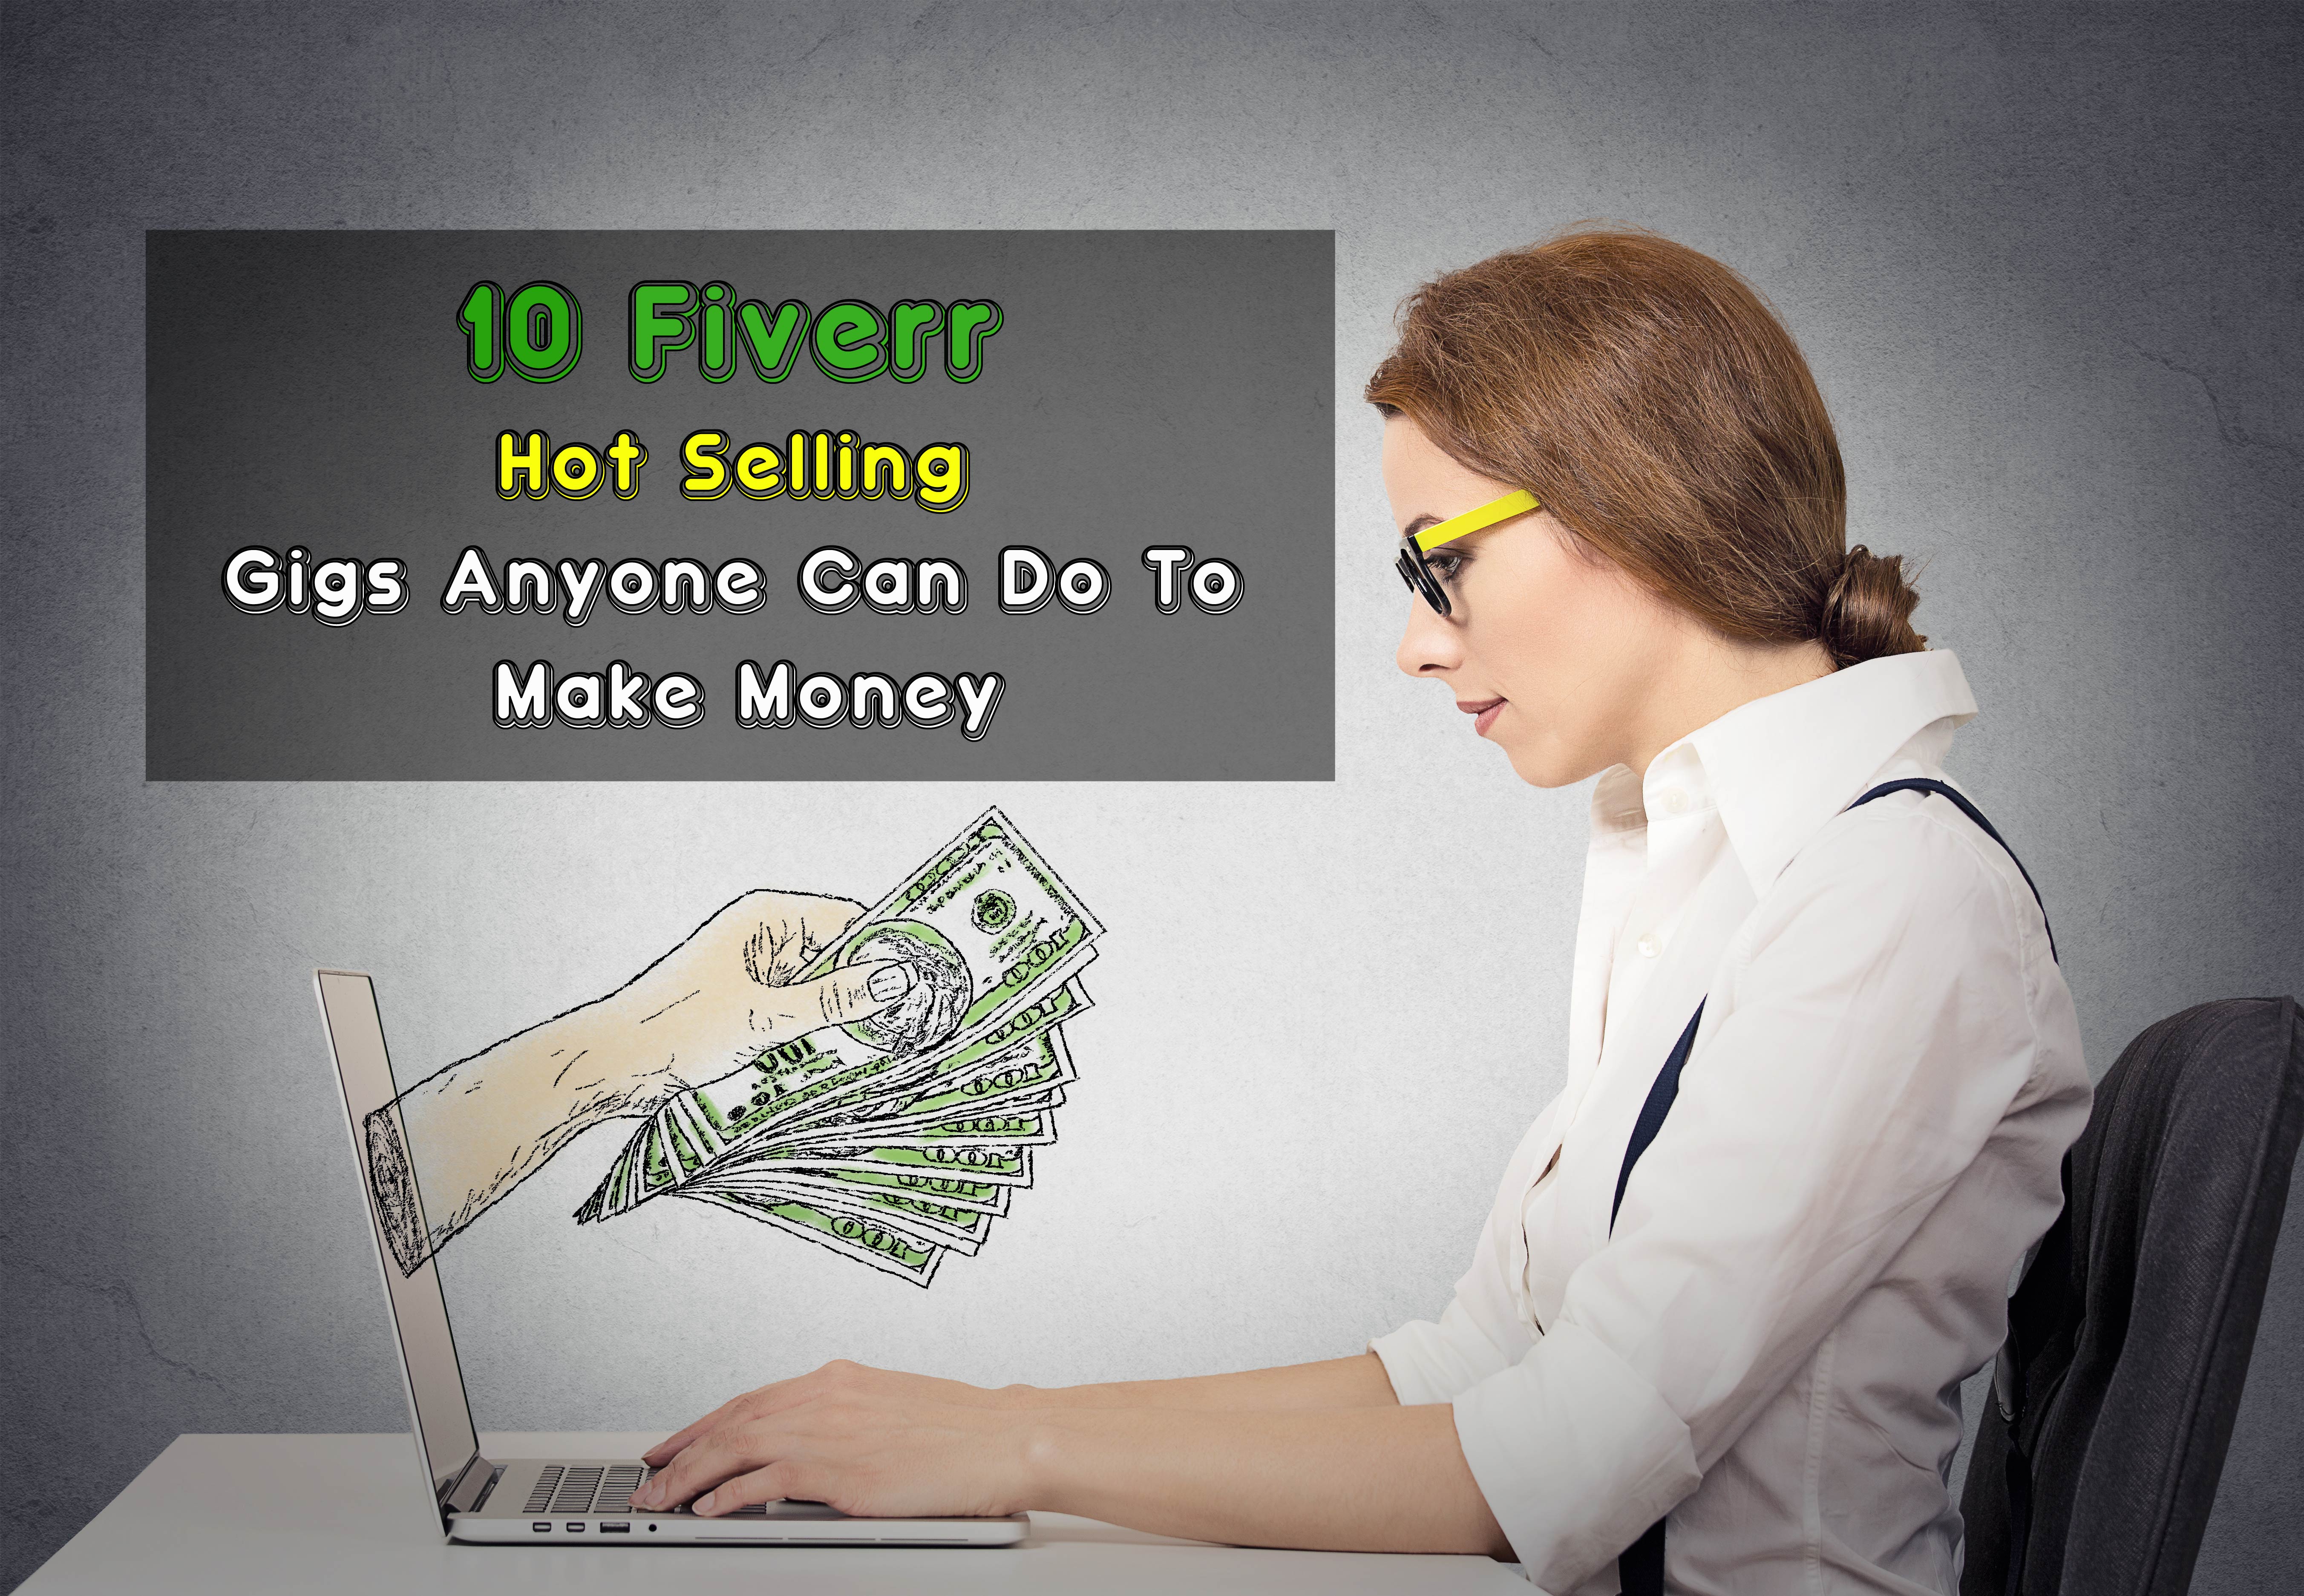 10 Fiverr Hot Selling Gigs Anyone Can Do To Make Money